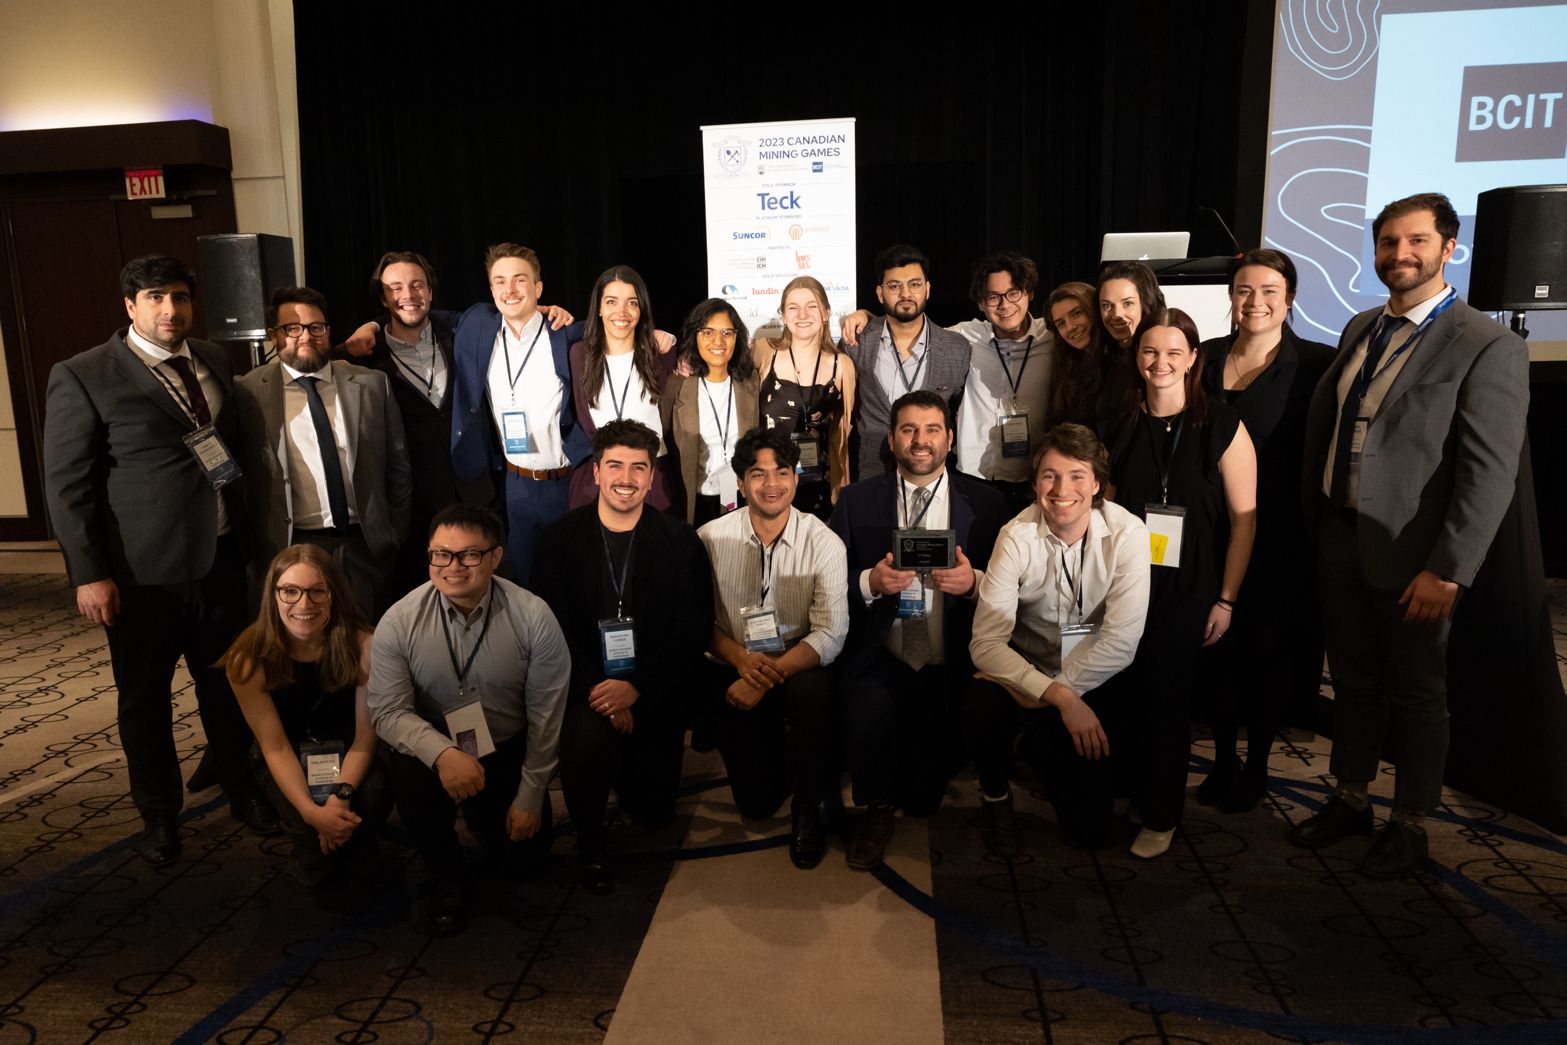 A group photo of BCIT Mining Engineering students who participated in the 2023 Canadian Mining Games.